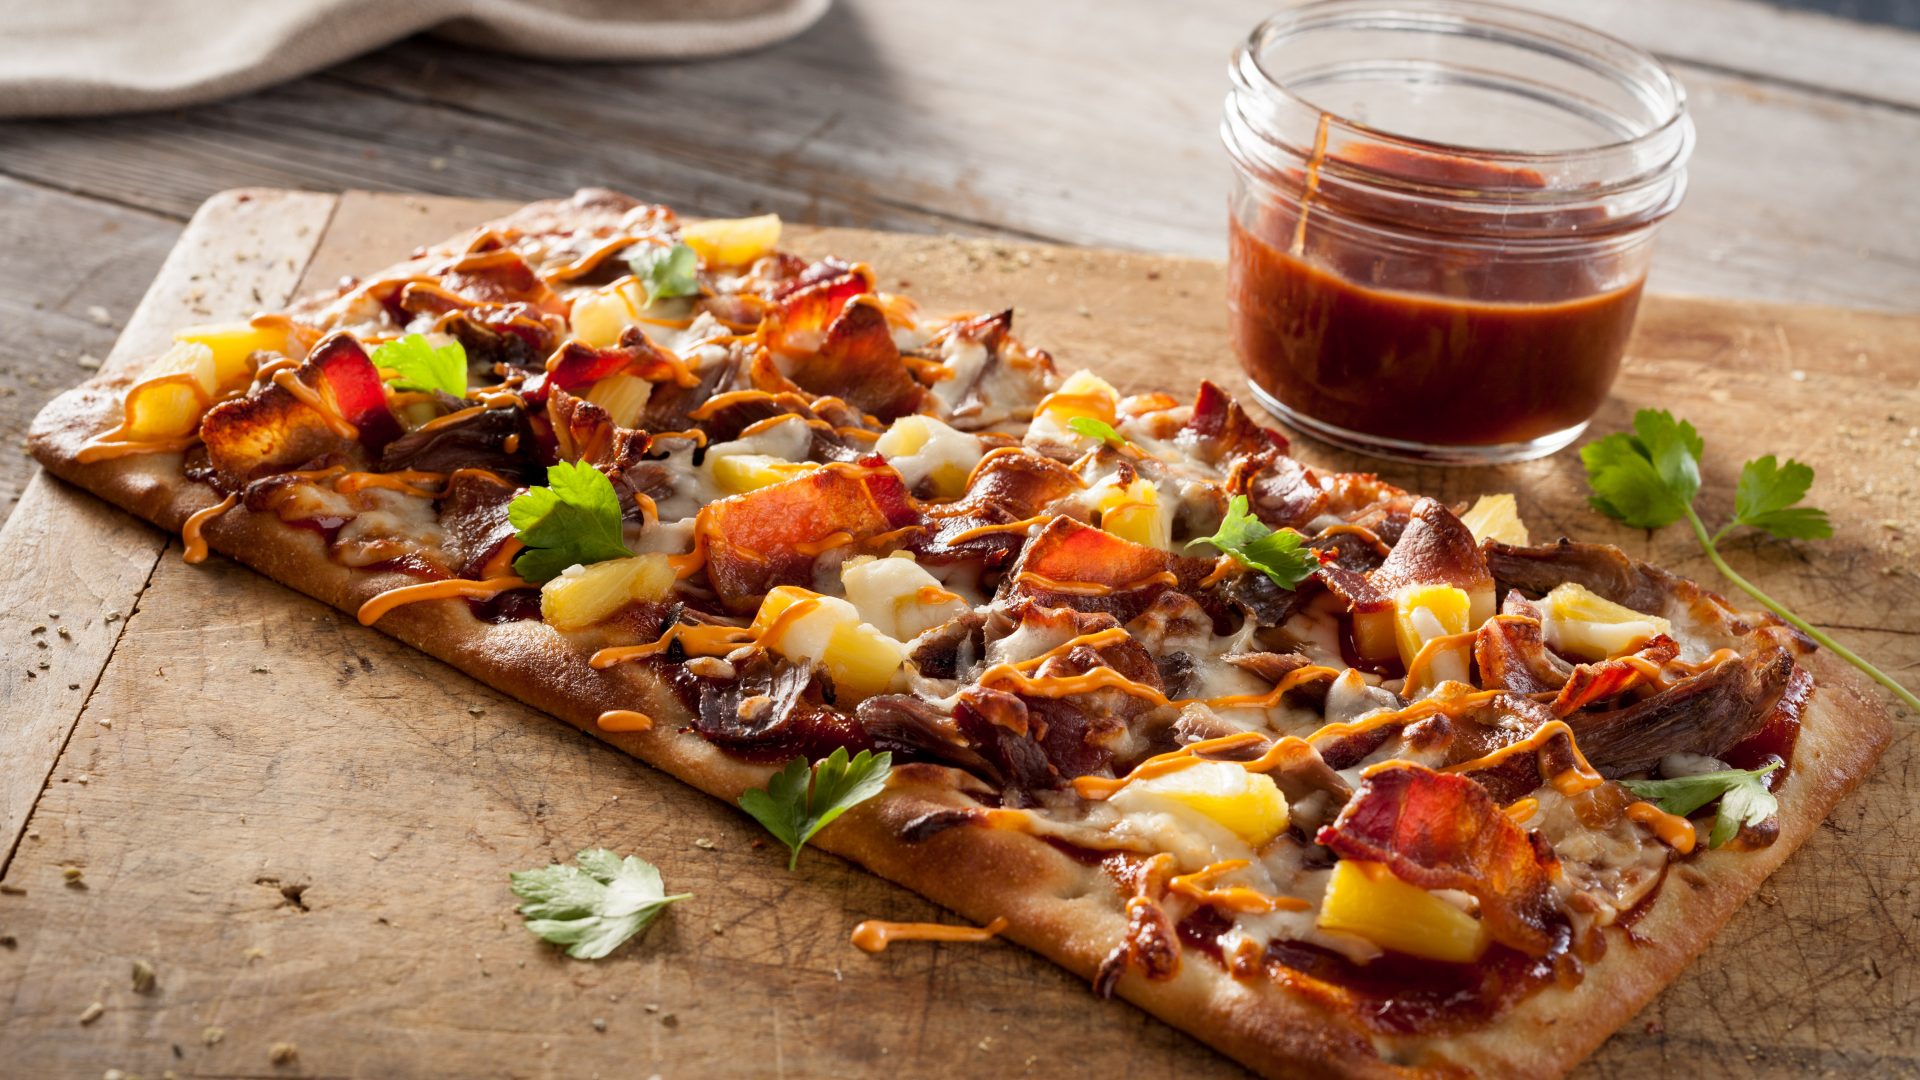 Stonefire Flatbread topped with bbq pulled pork, pineapple, cheese and cilantro.